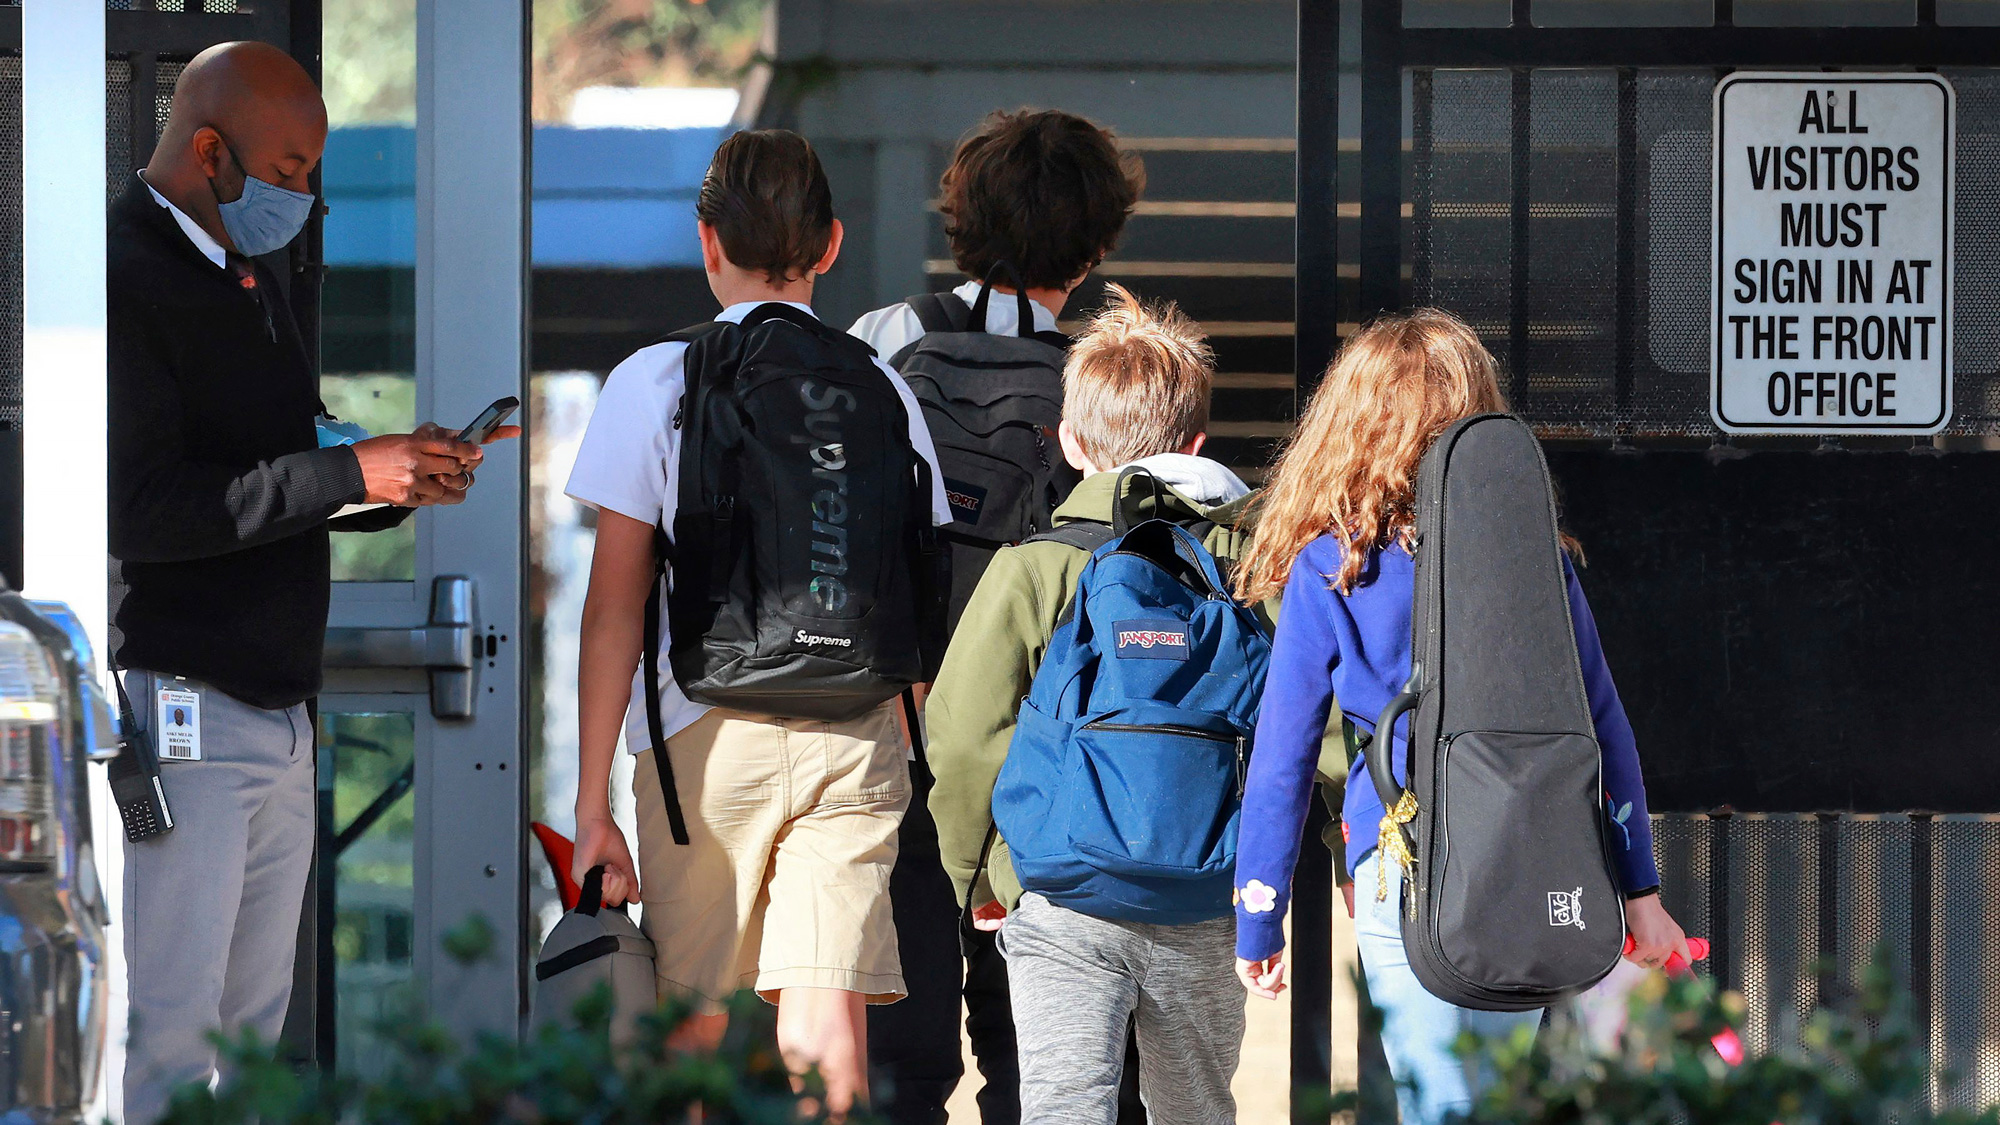 Students arrive at Maitland Middle School on the first day of classes after the winter break, Tuesday, January 4.